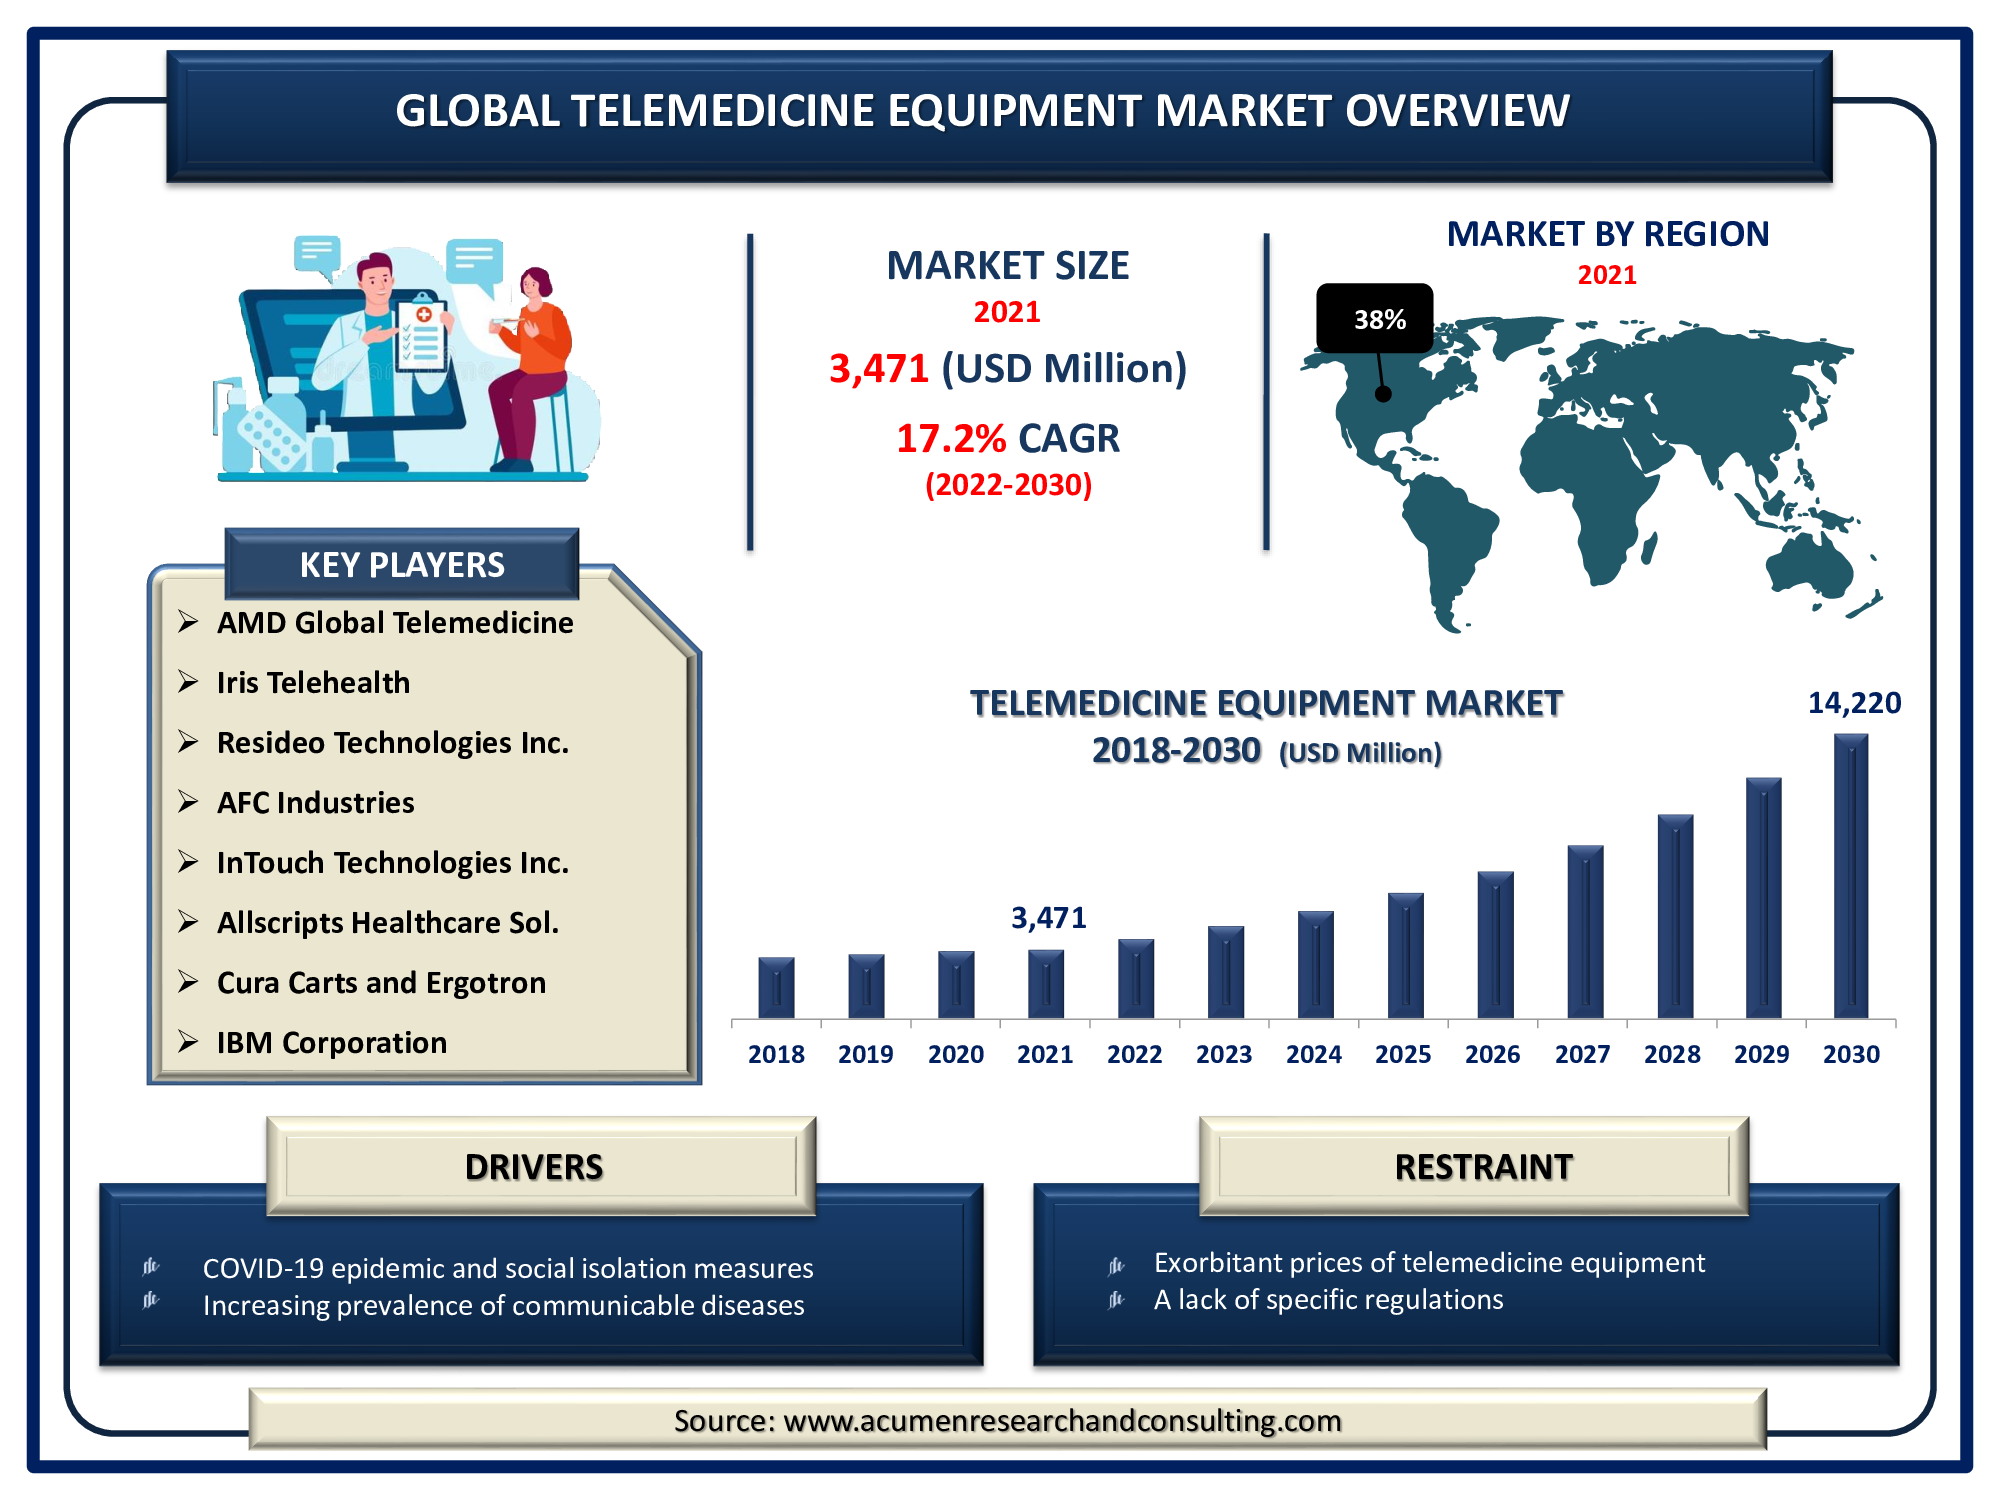 Telemedicine Equipment Market is expected to reach USD 14,220 Million by 2030 at a CAGR of 17.2%